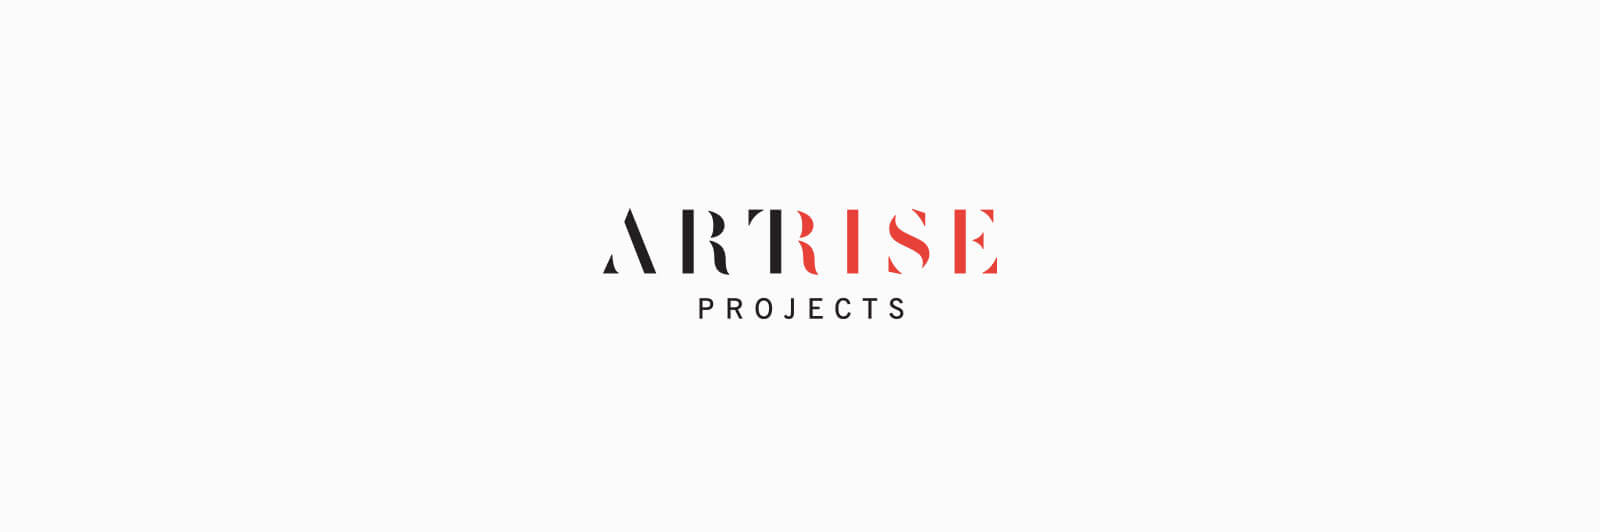 Artrise Projects logotype in black and red